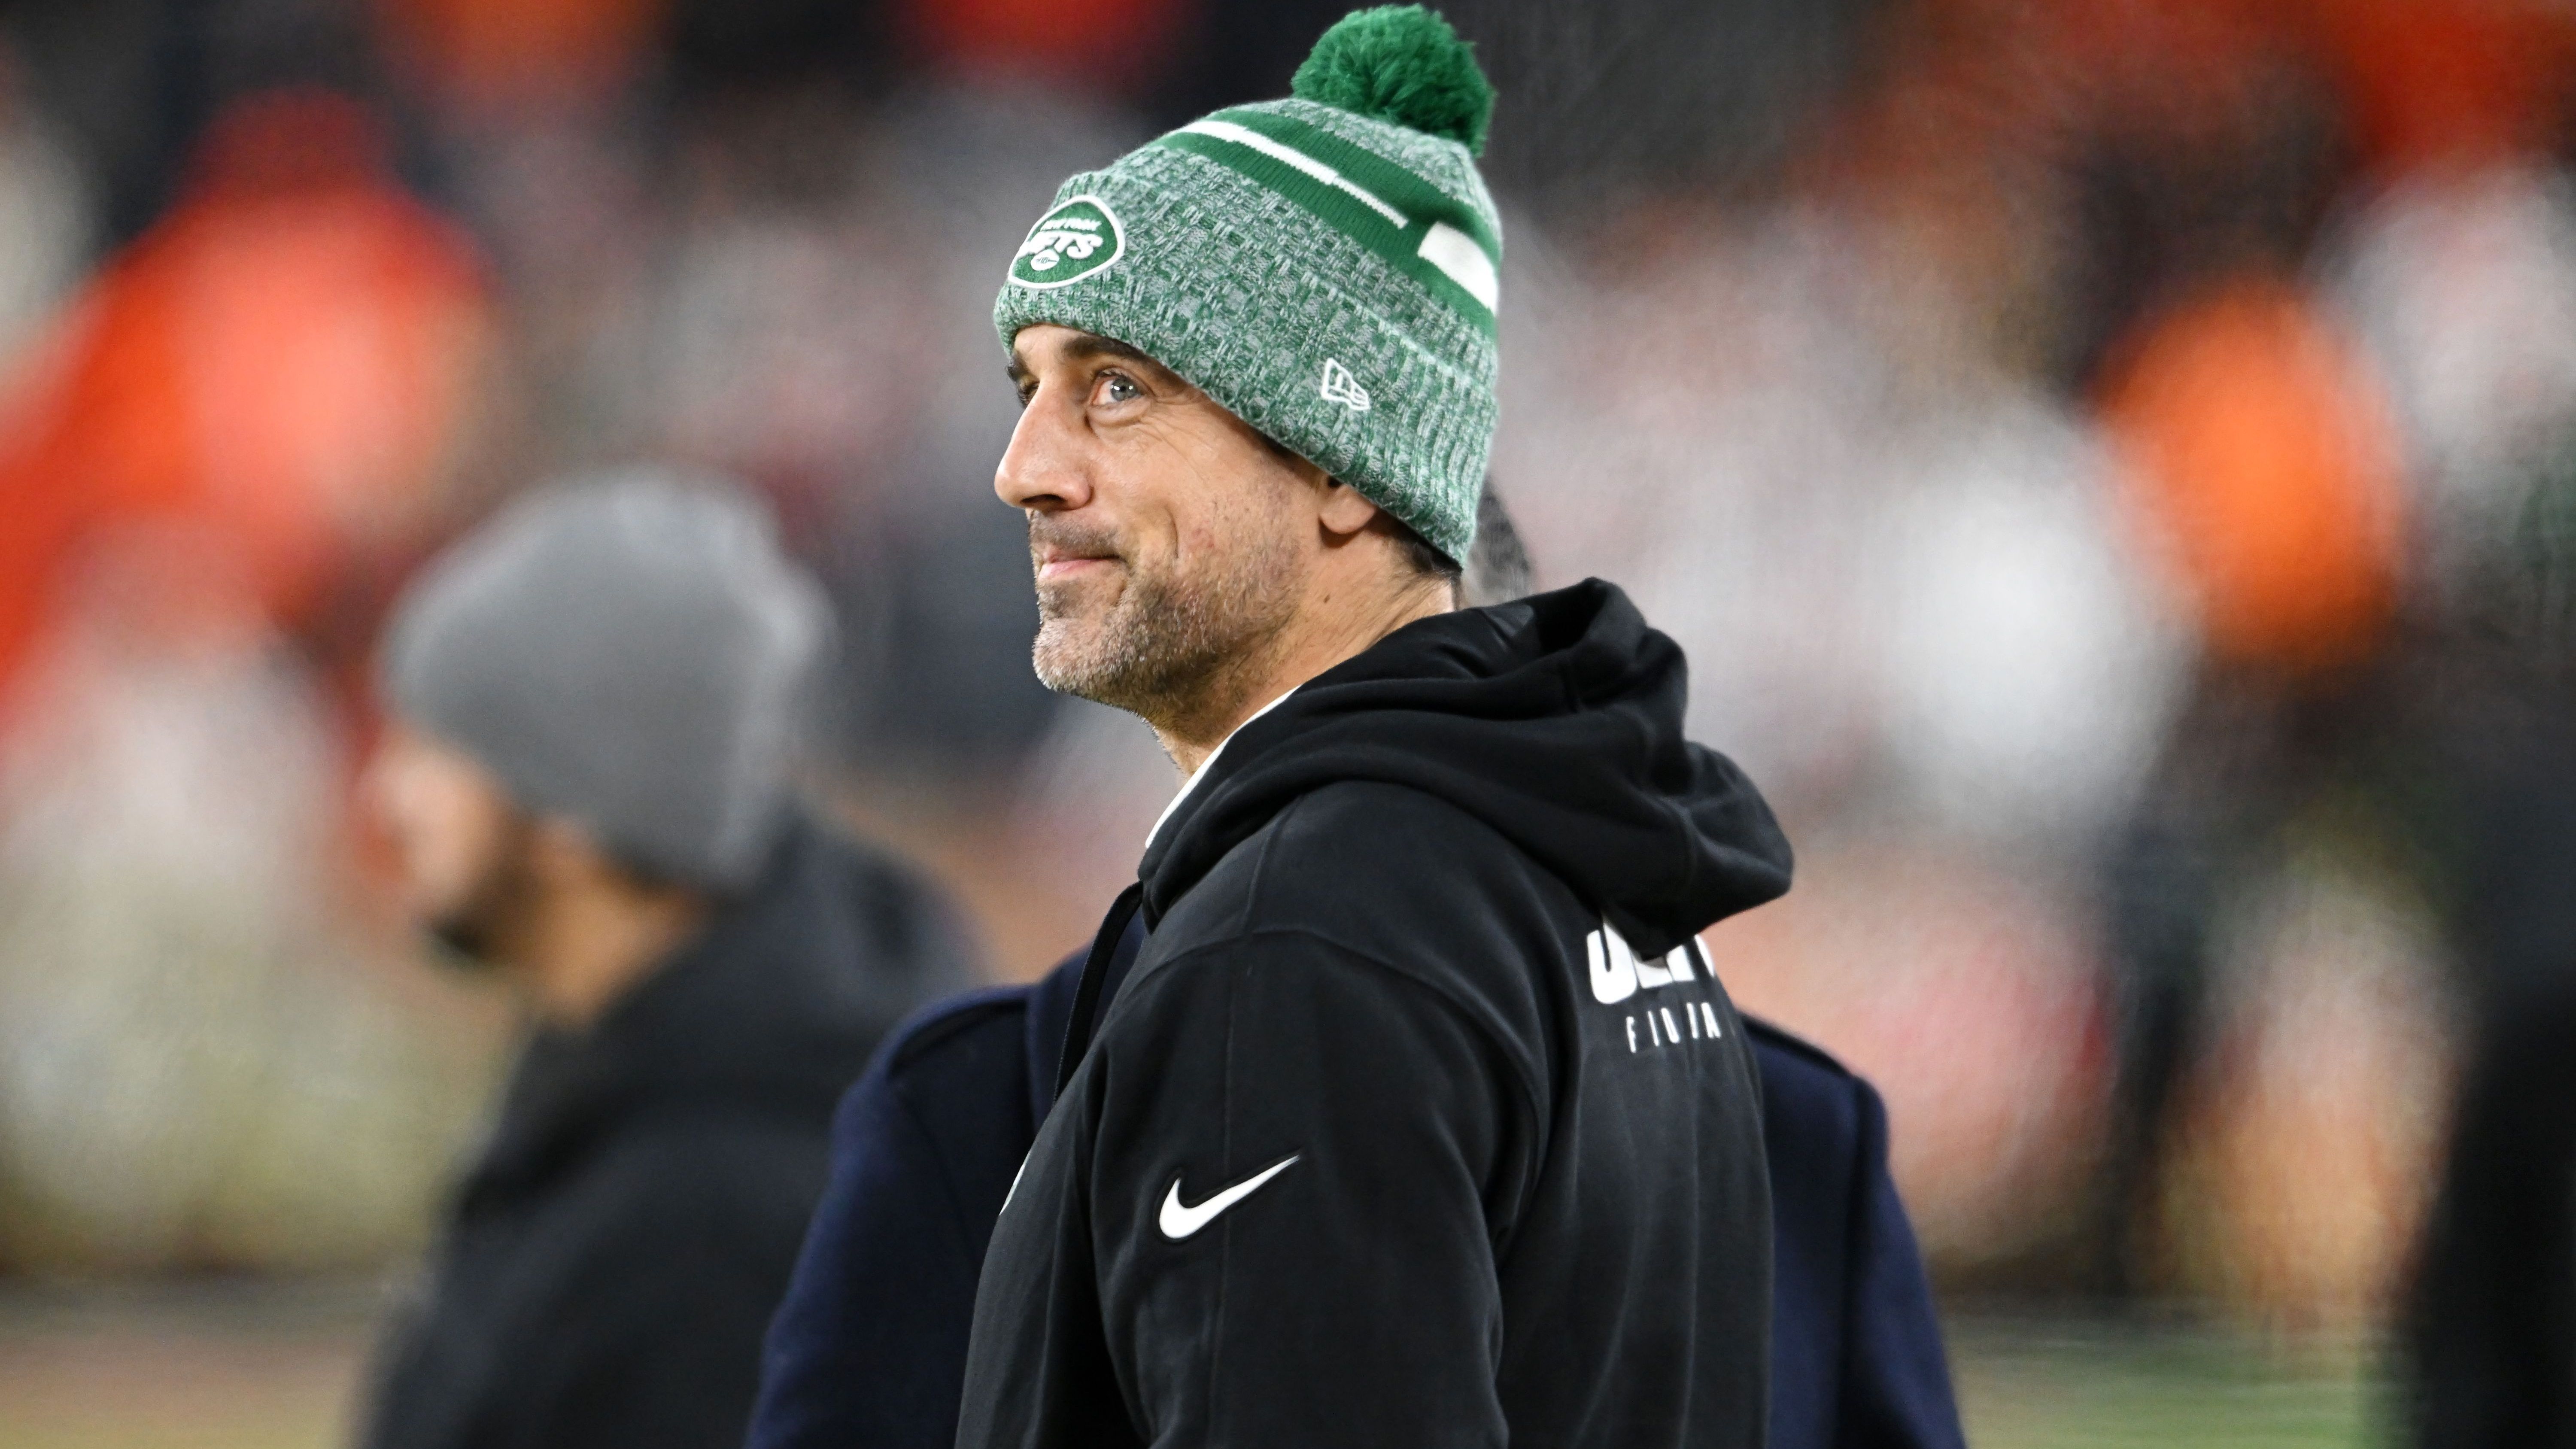 <strong>New York Jets: Aaron Rodgers<br></strong>Alter: 40 Jahre, 4 Monate und 8 Tag<br>Geburtsdatum: 2. Dezember 1983<br>Position: Quarterback